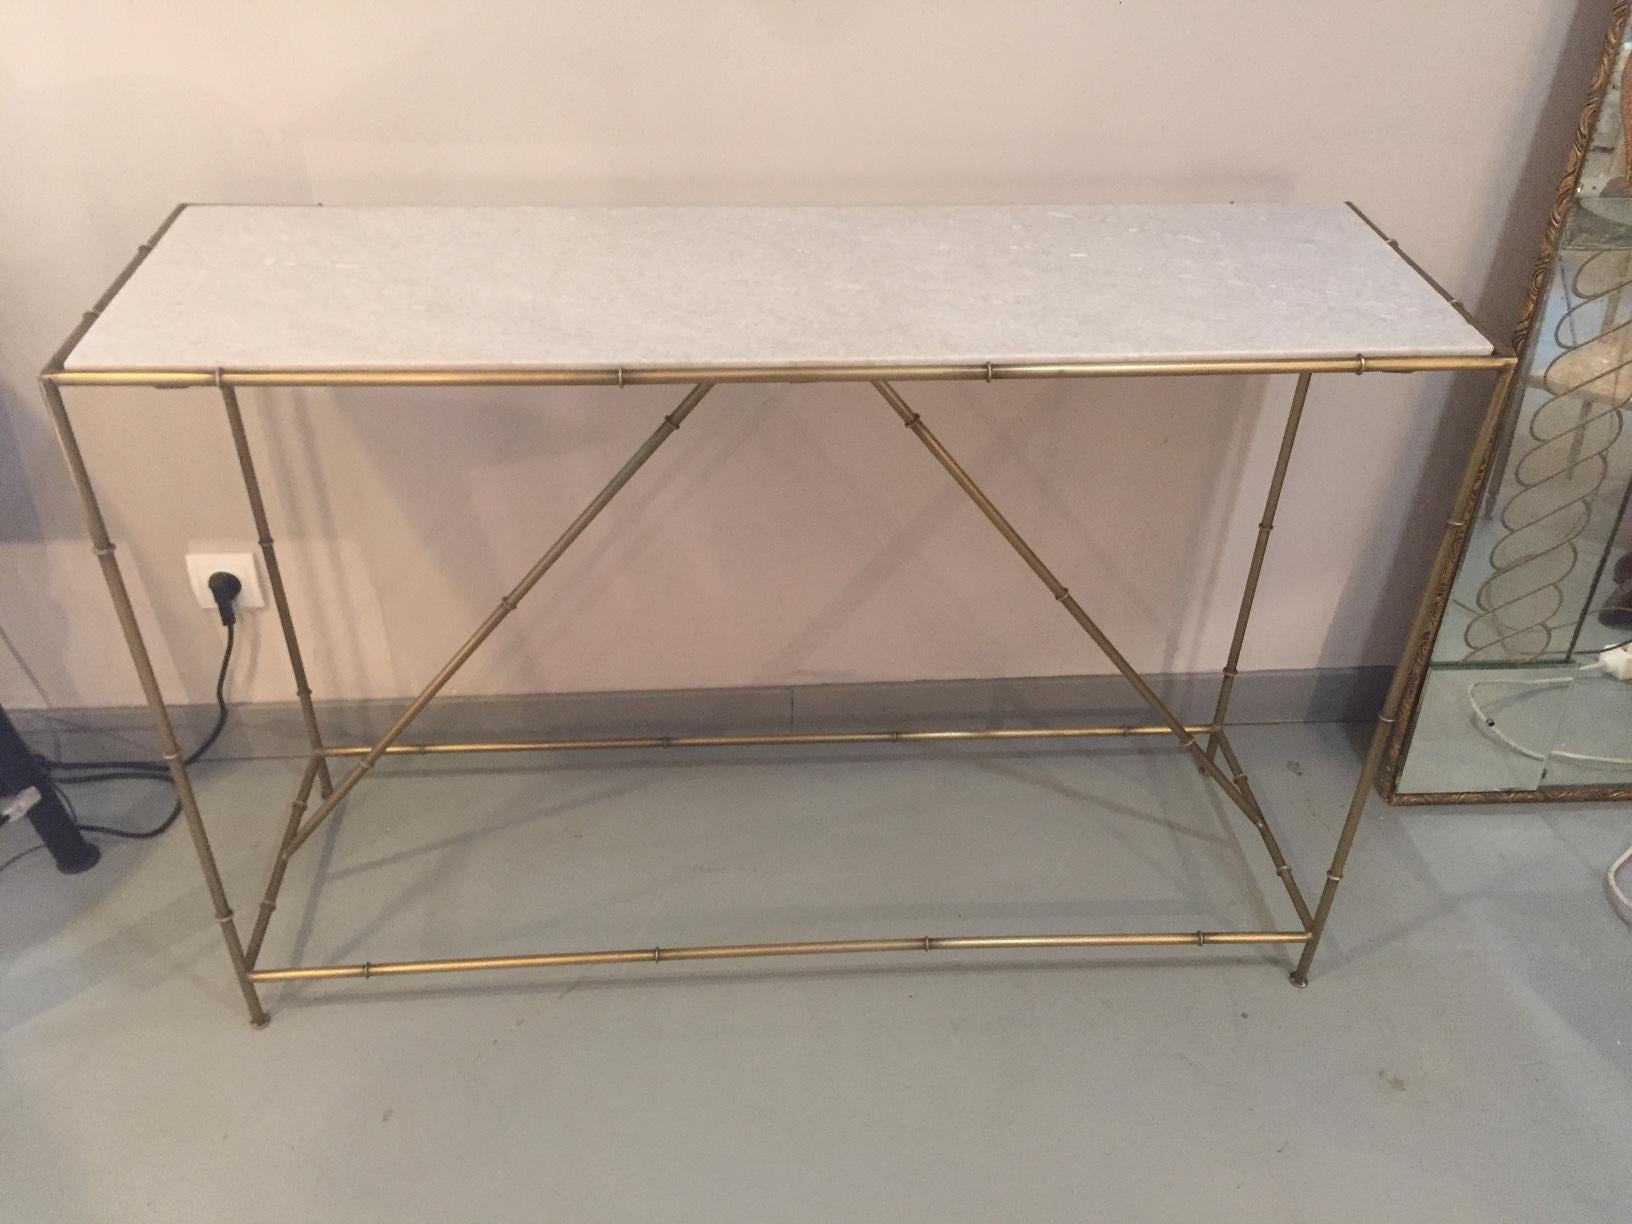 Beautiful Contemporary golden metal and Carrara marble.
The marble top is removable. Is a reproduction from the 1950s.
Very nice quality.